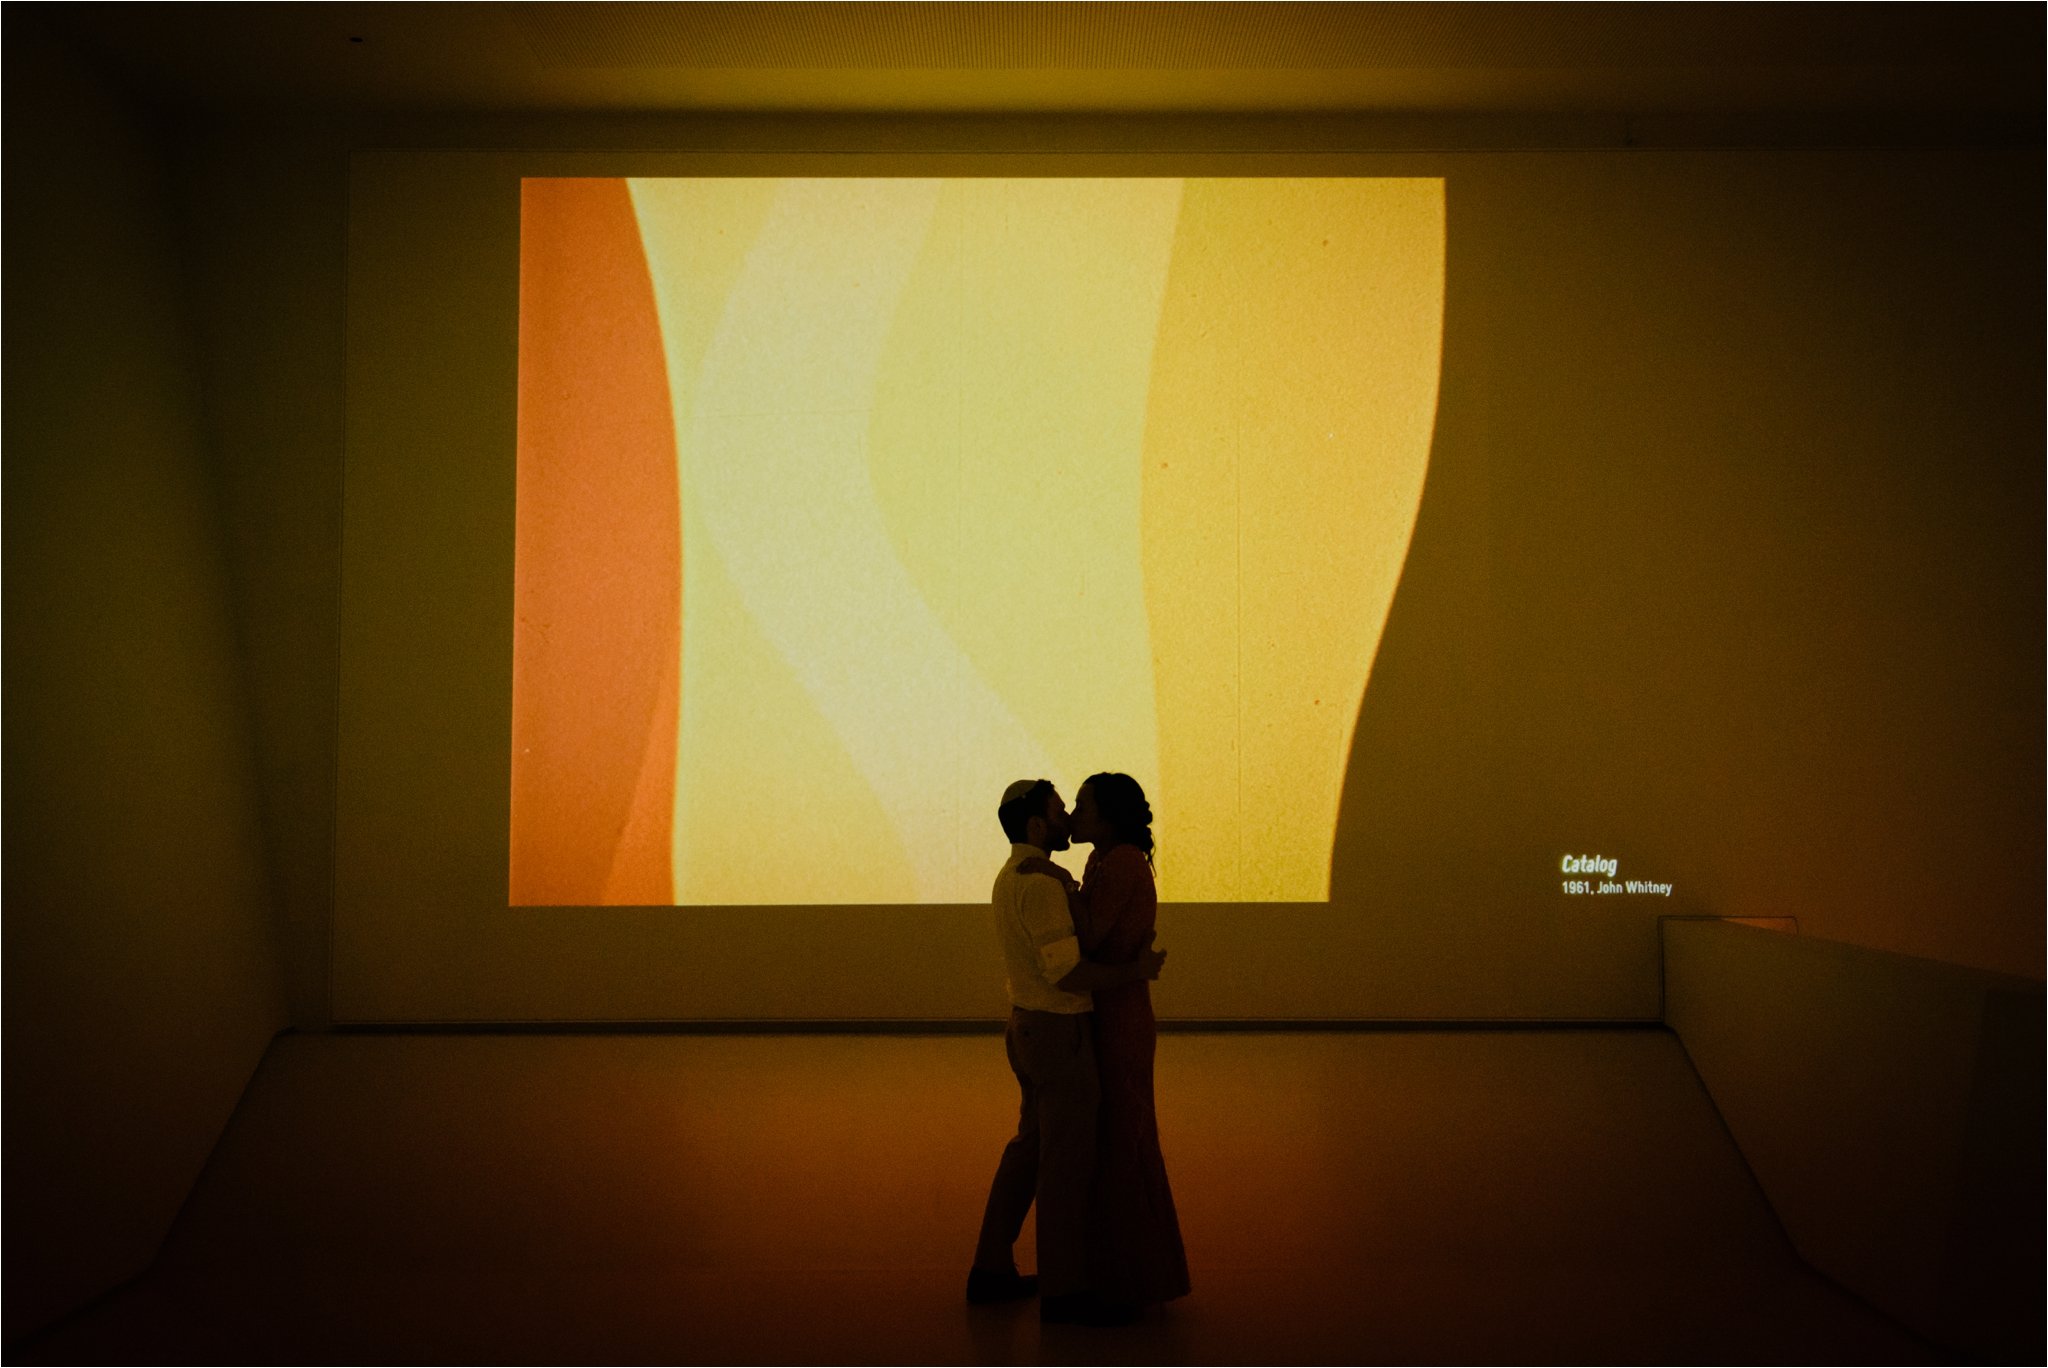 Museum of the Moving Image Wedding, Brian Hatton Photography